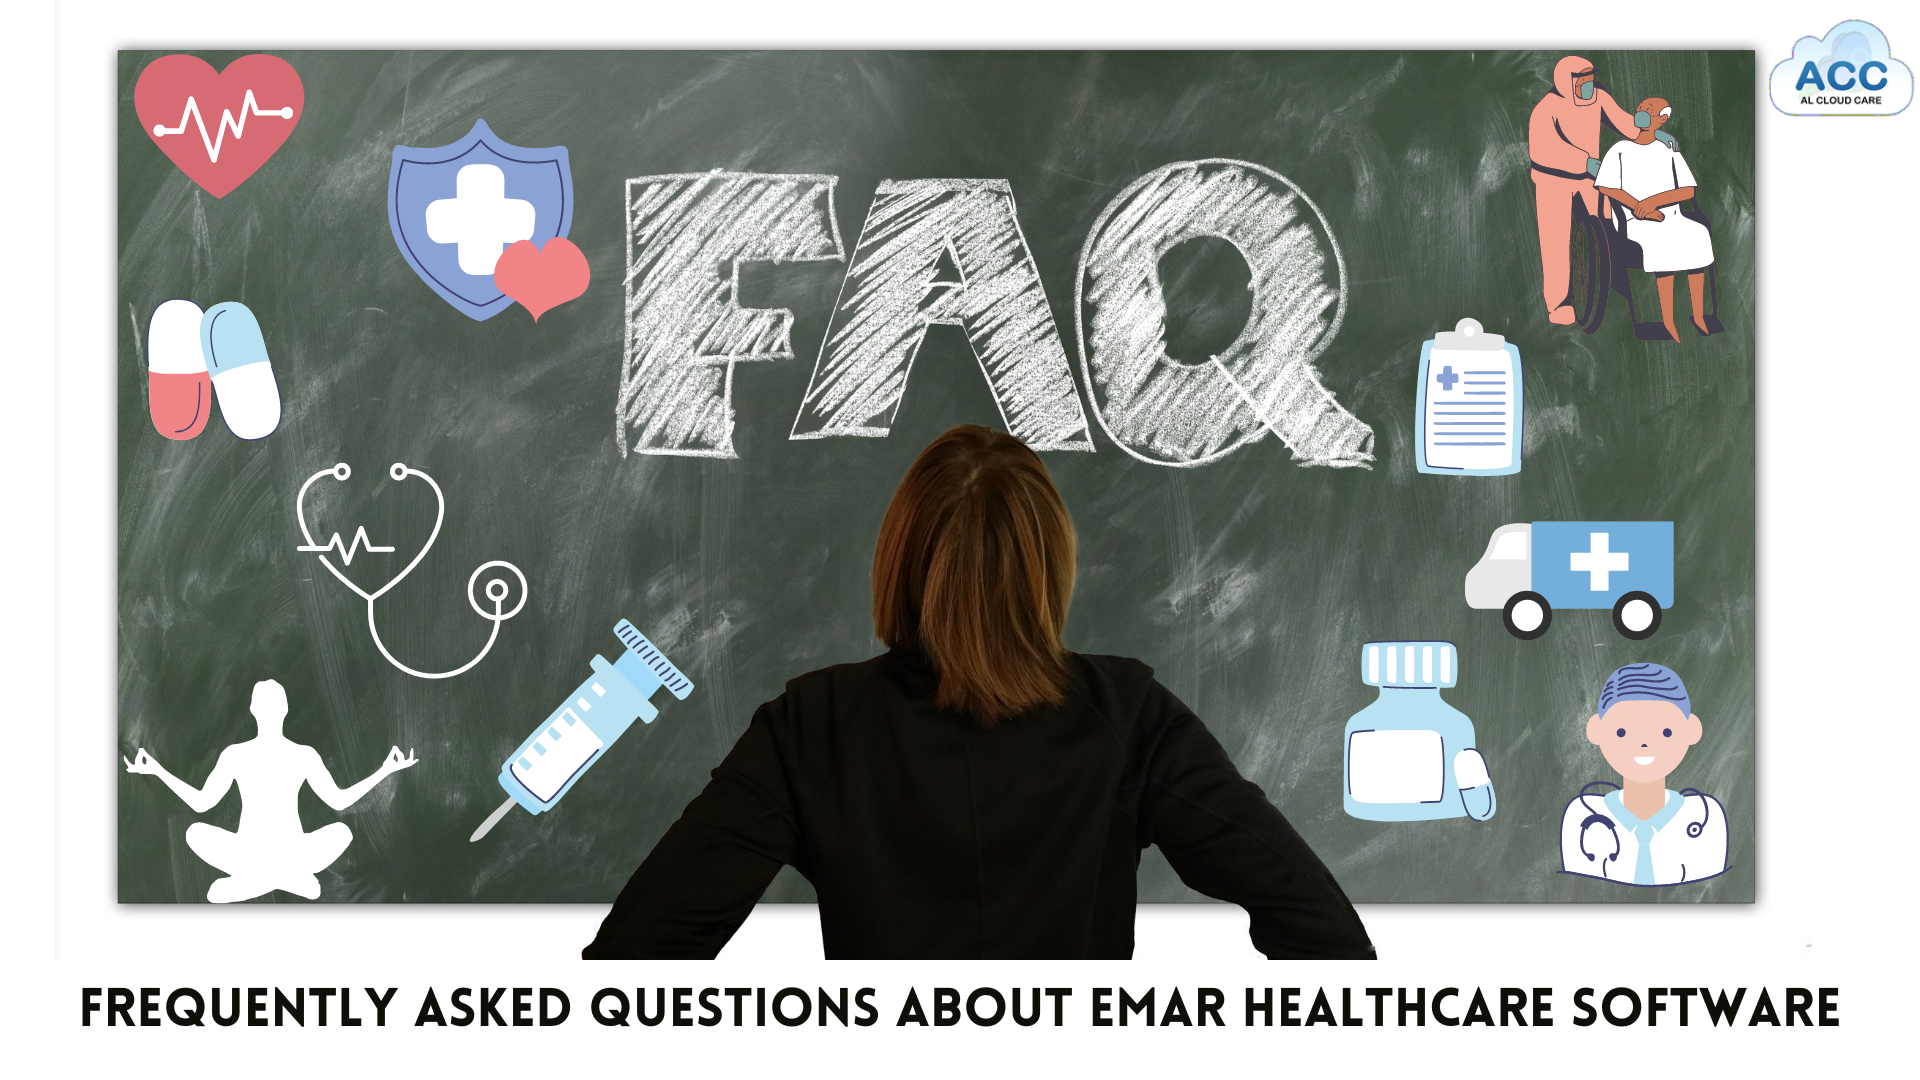 public/uploads/2021/11/Frequently-Asked-Questions-About-Emar-Healthcare-Software.png